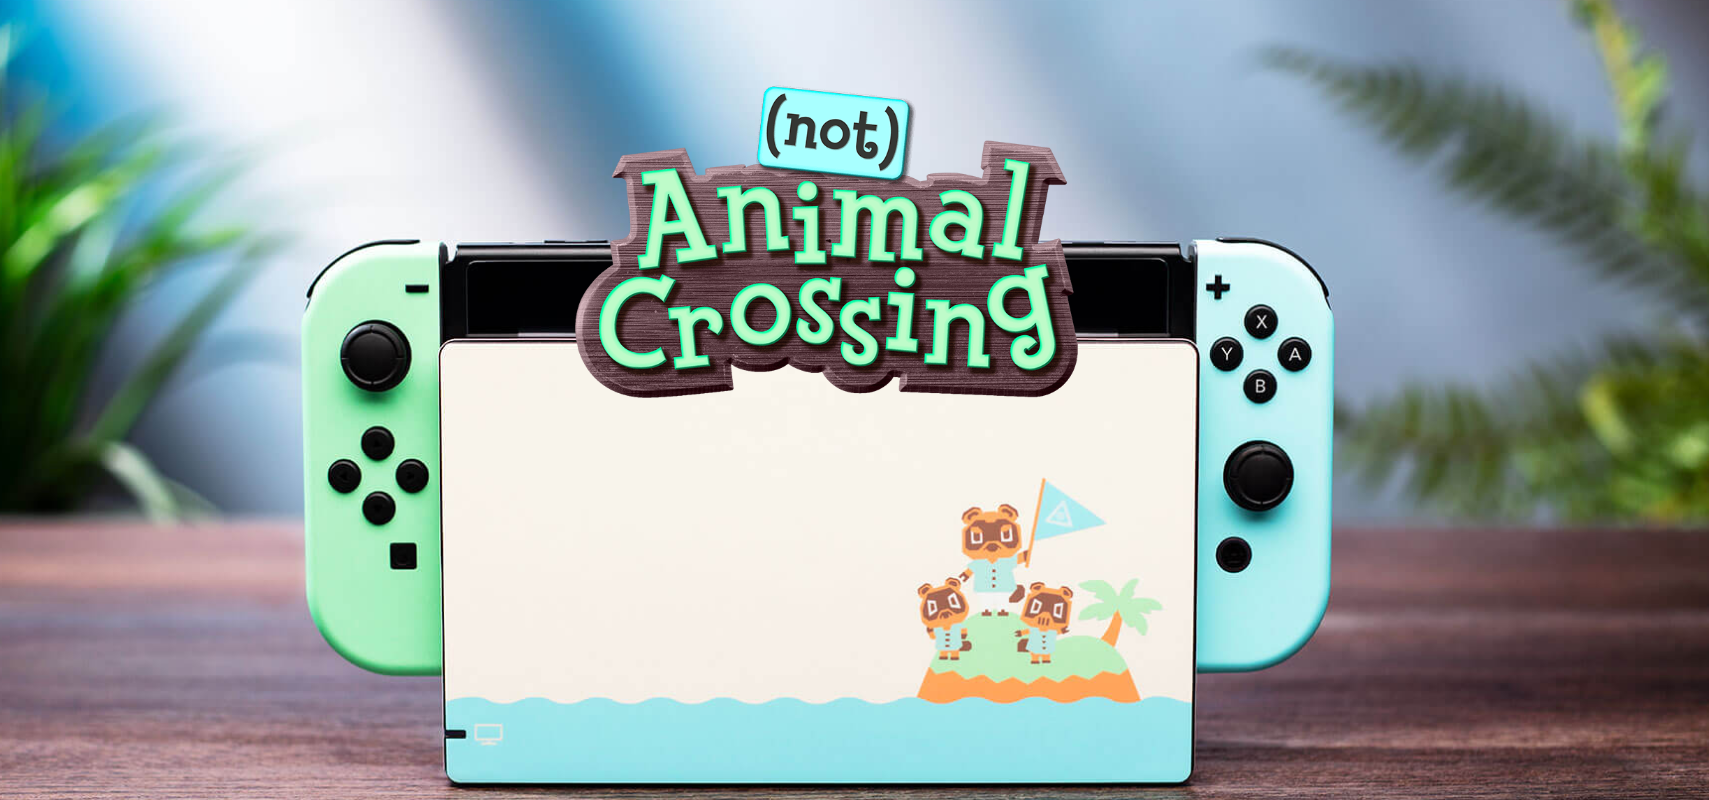 Do you want a (not) Animal Crossing Nintendo Switch?